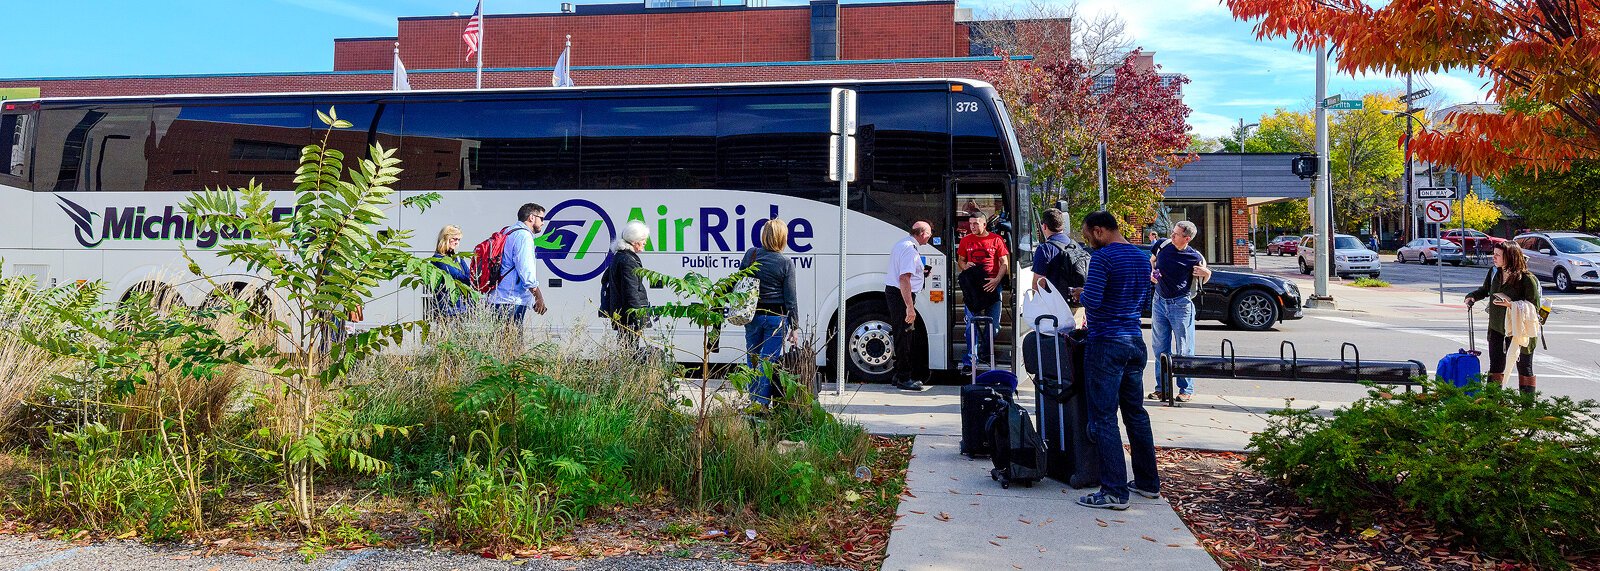 A Michigan Flyer operated shuttle picking up passengers at the Blake Transit Center.